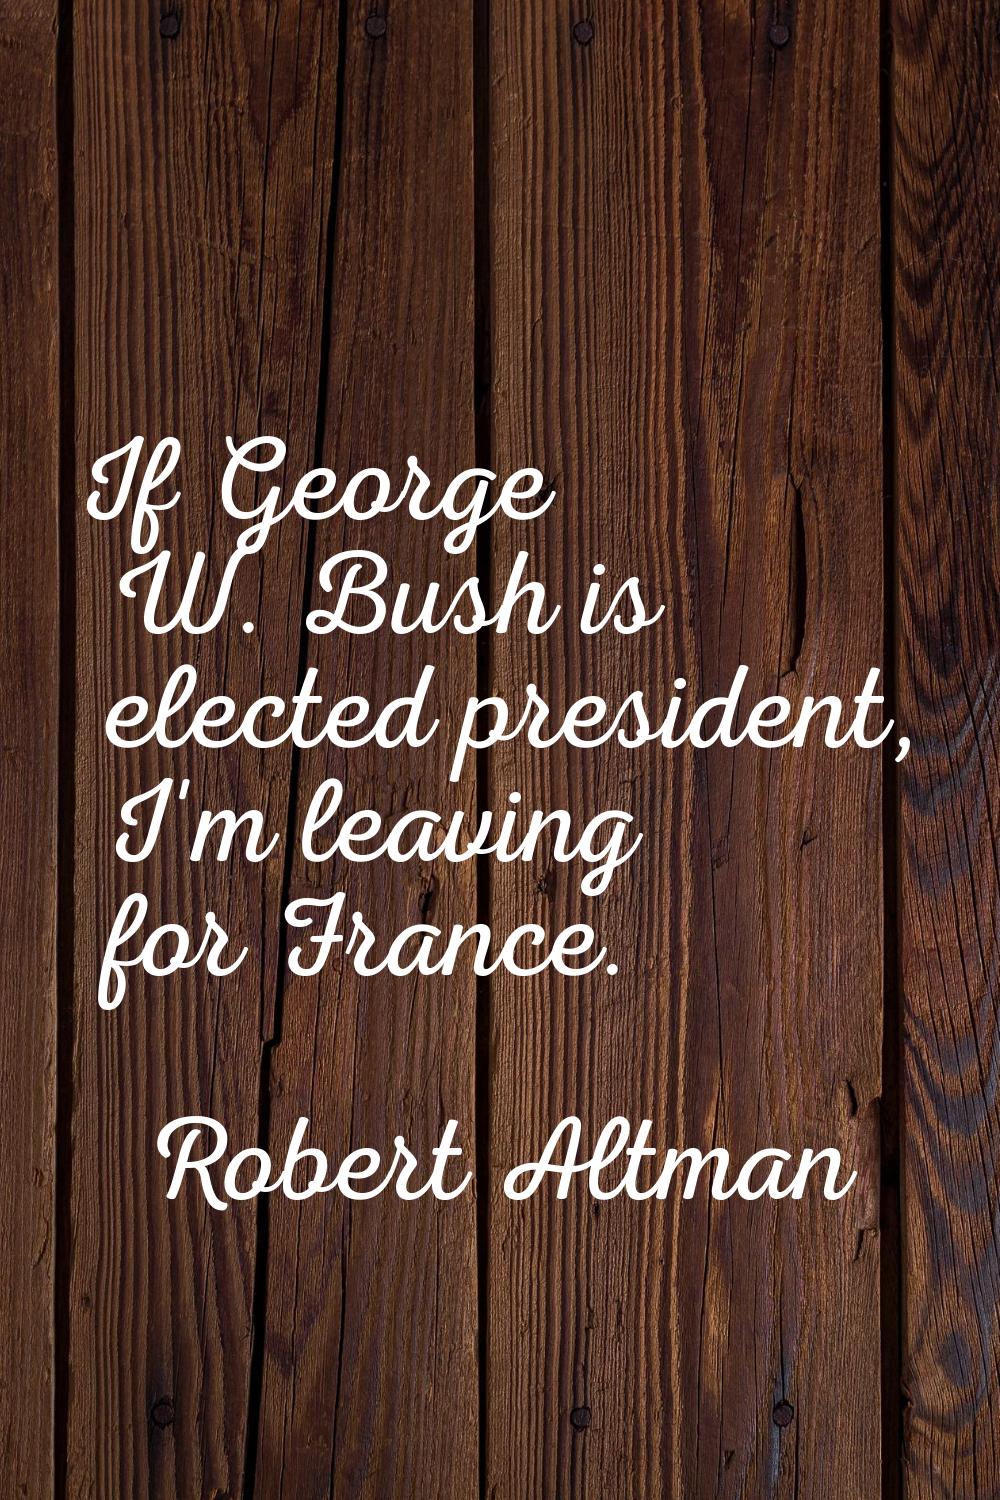 If George W. Bush is elected president, I'm leaving for France.